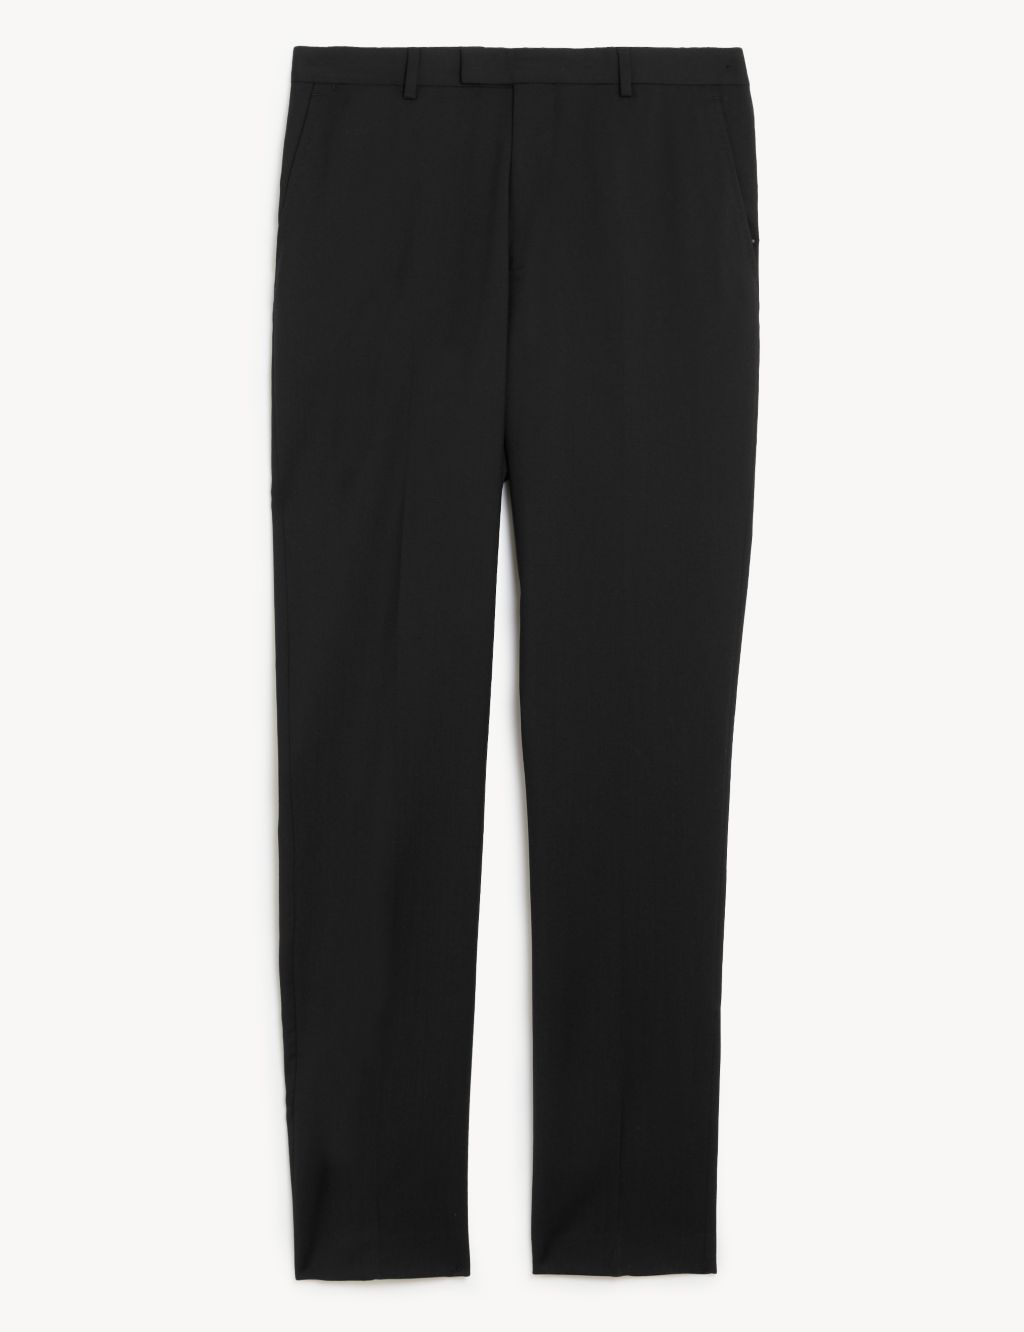 Slim Fit Pure Wool Twill Trousers image 2